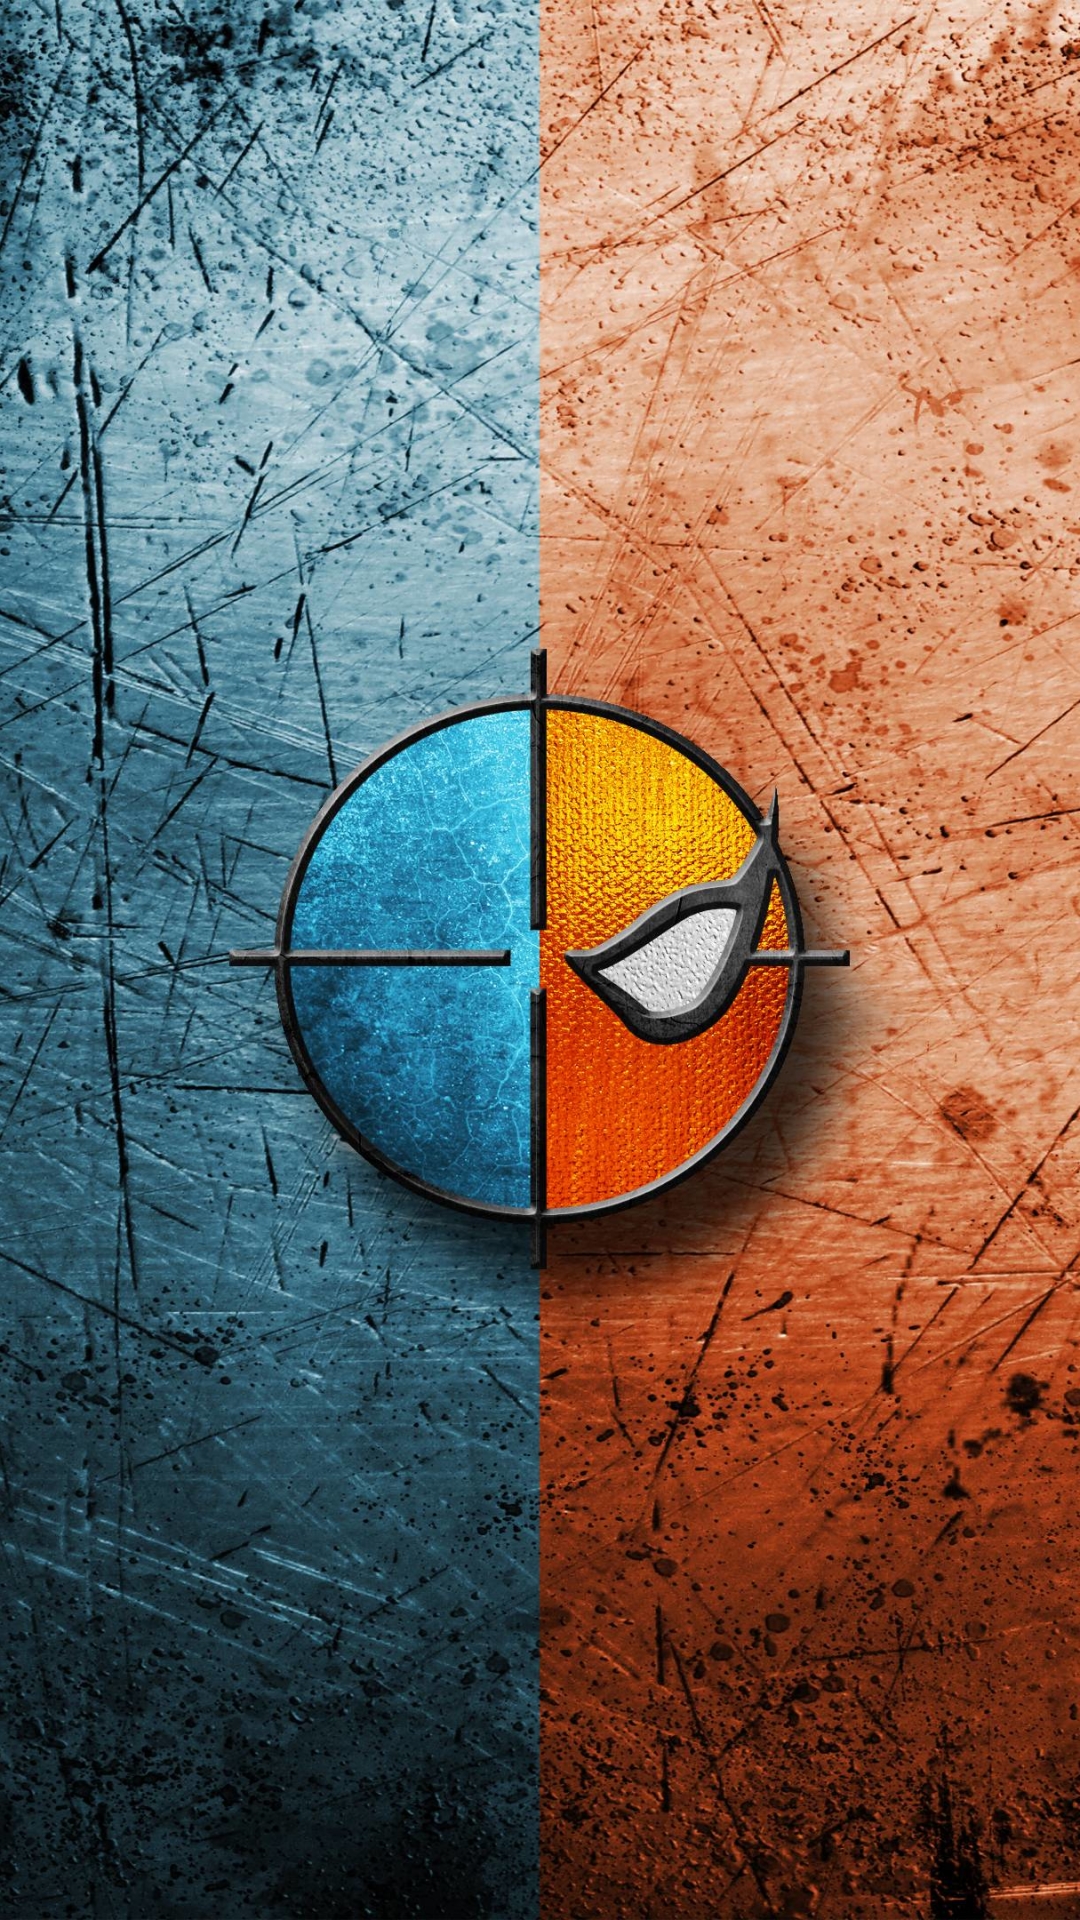 Download mobile wallpaper Comics, Deathstroke for free.